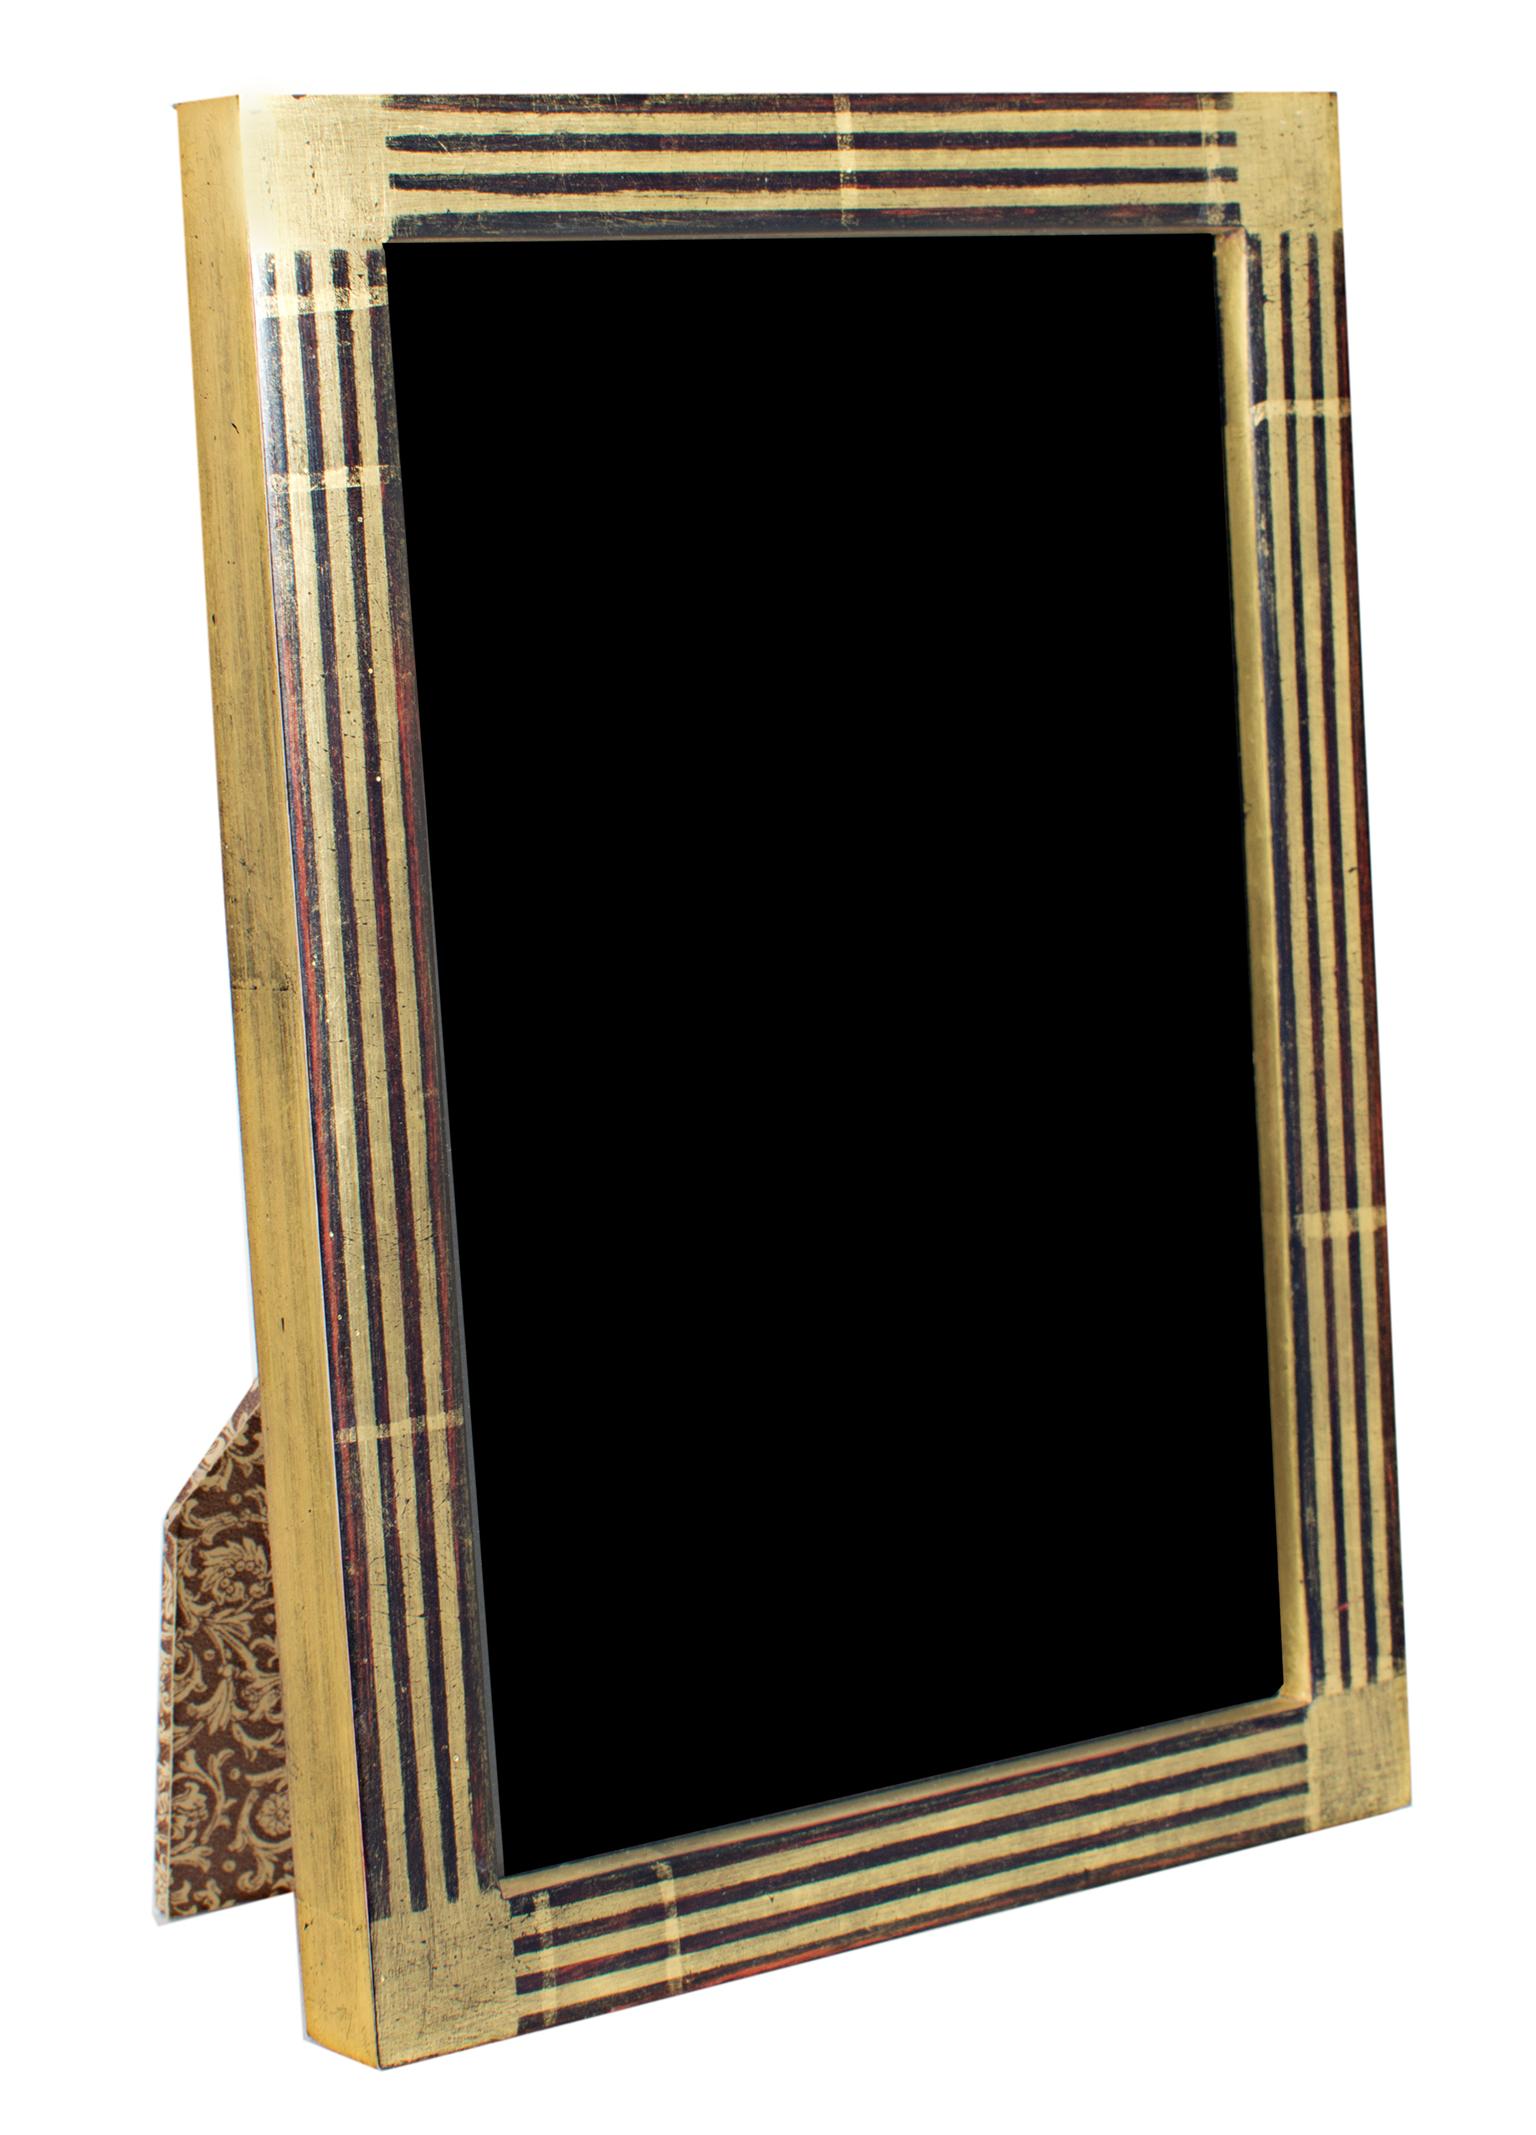 "Handmade 22K Gold Leaf Photo Frame, " Wood 4 x 6 in made in Romania - Art by Unknown